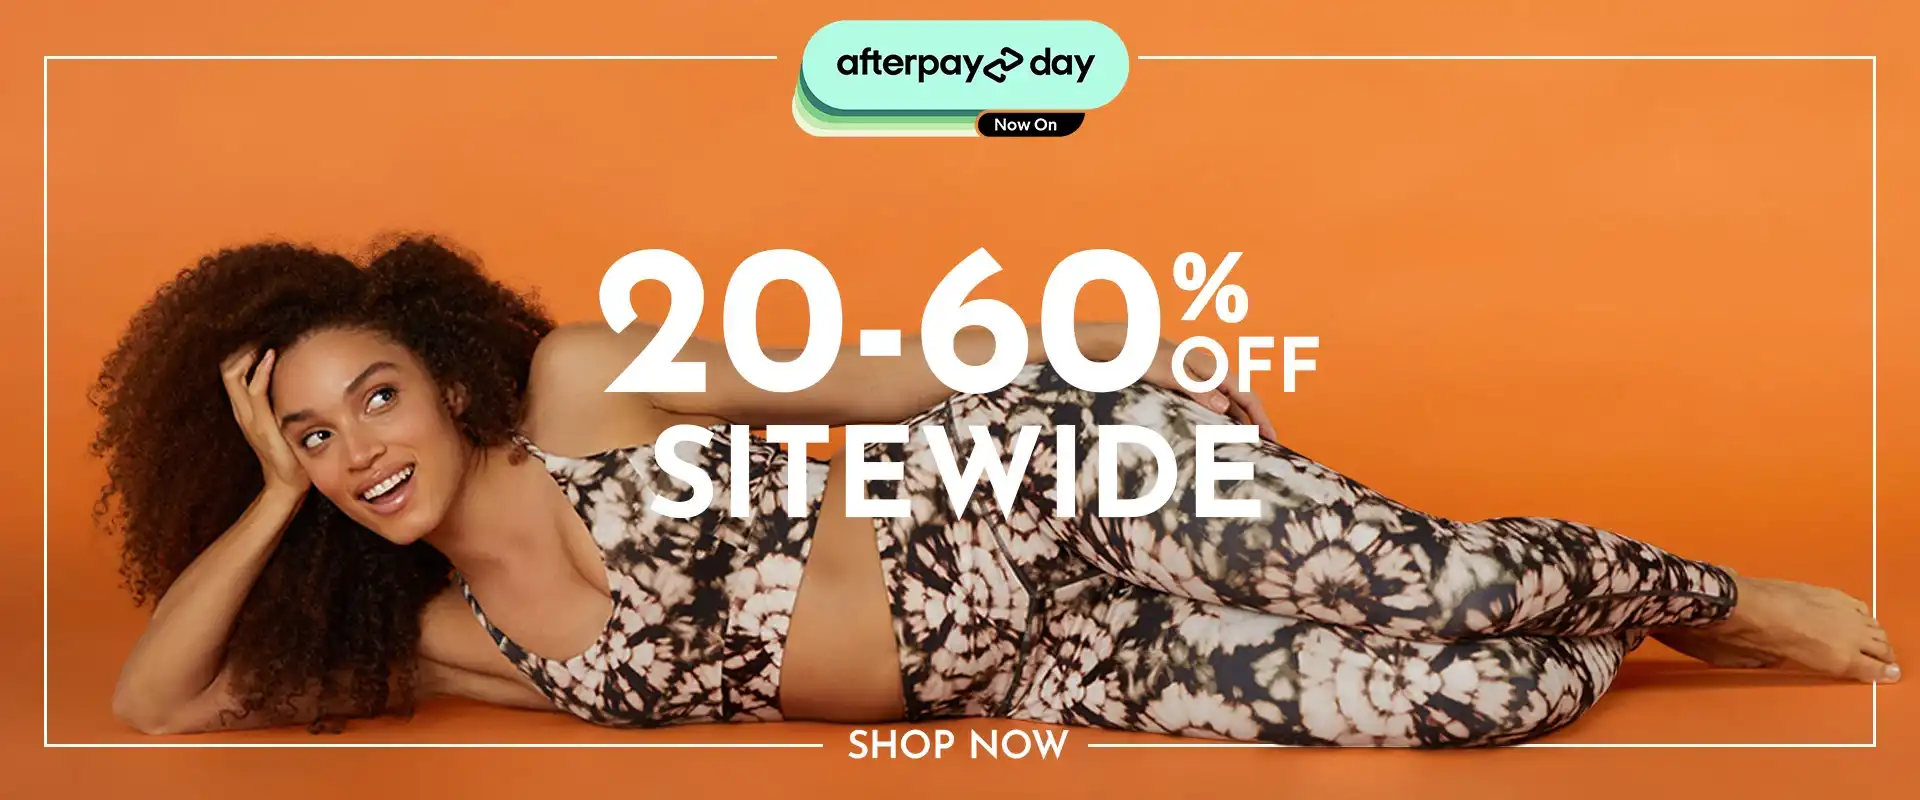 Save 20-60% OFF sitewide